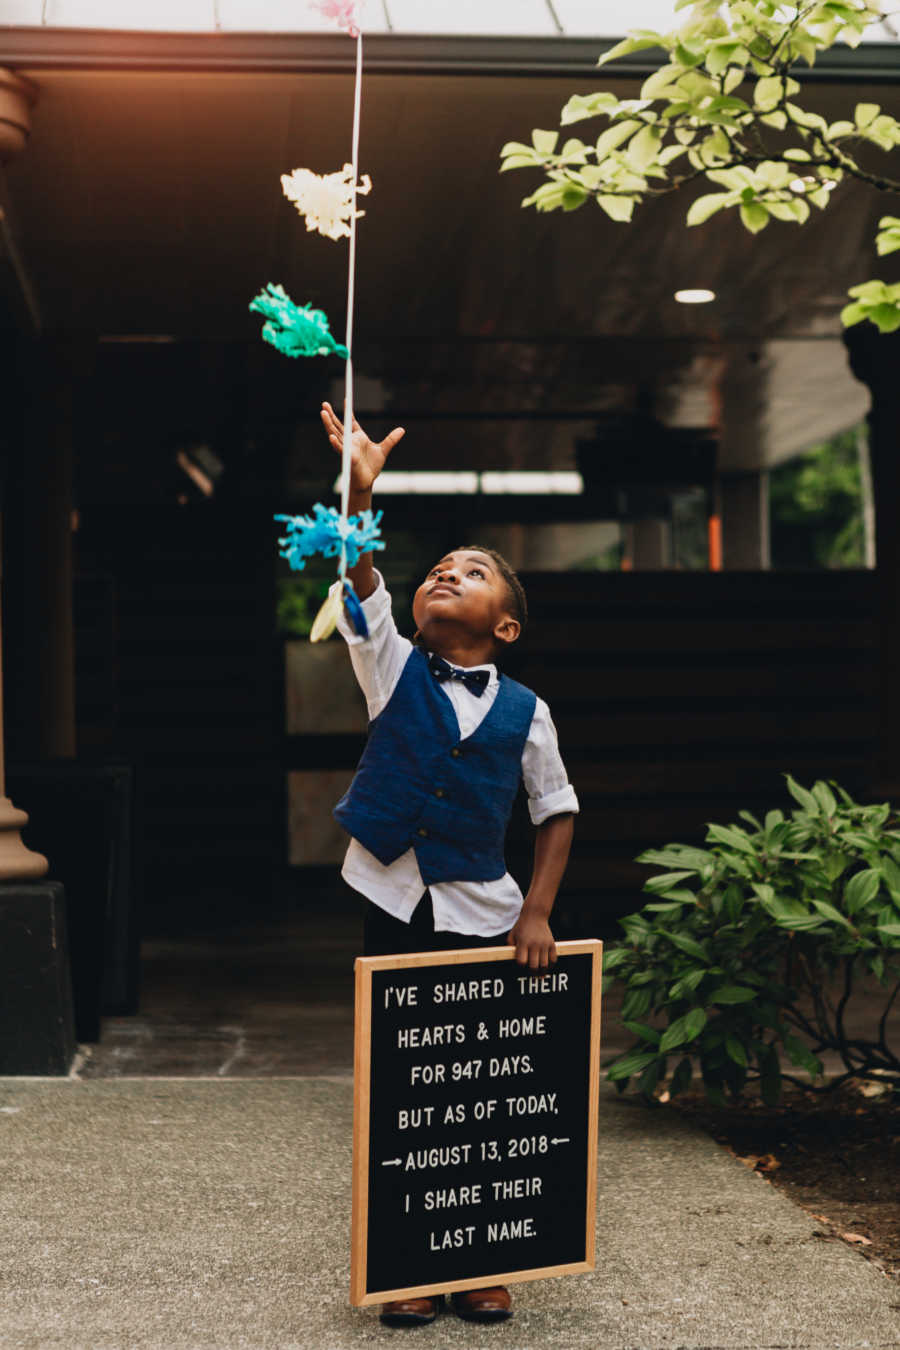 Little boy in blue vest and boy tie holds sign in one hand while reaching for balloon string